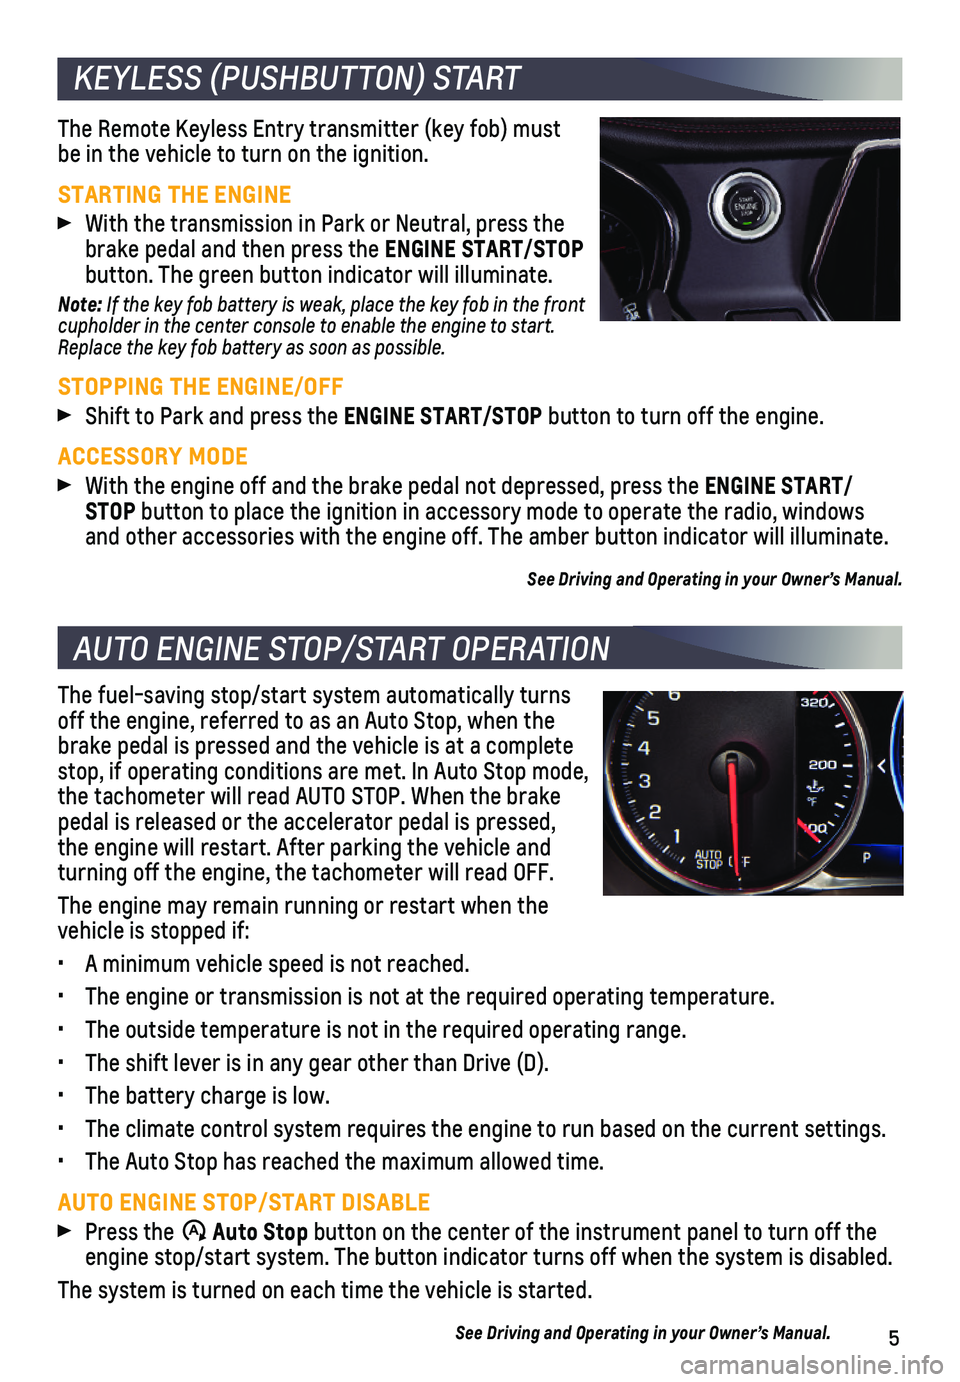 CHEVROLET BLAZER 2021  Get To Know Guide 5
KEYLESS (PUSHBUTTON) START
AUTO ENGINE STOP/START OPERATION 
The Remote Keyless Entry transmitter (key fob) must be in the vehicle to turn on the ignition.
STARTING THE ENGINE
 With the transmission